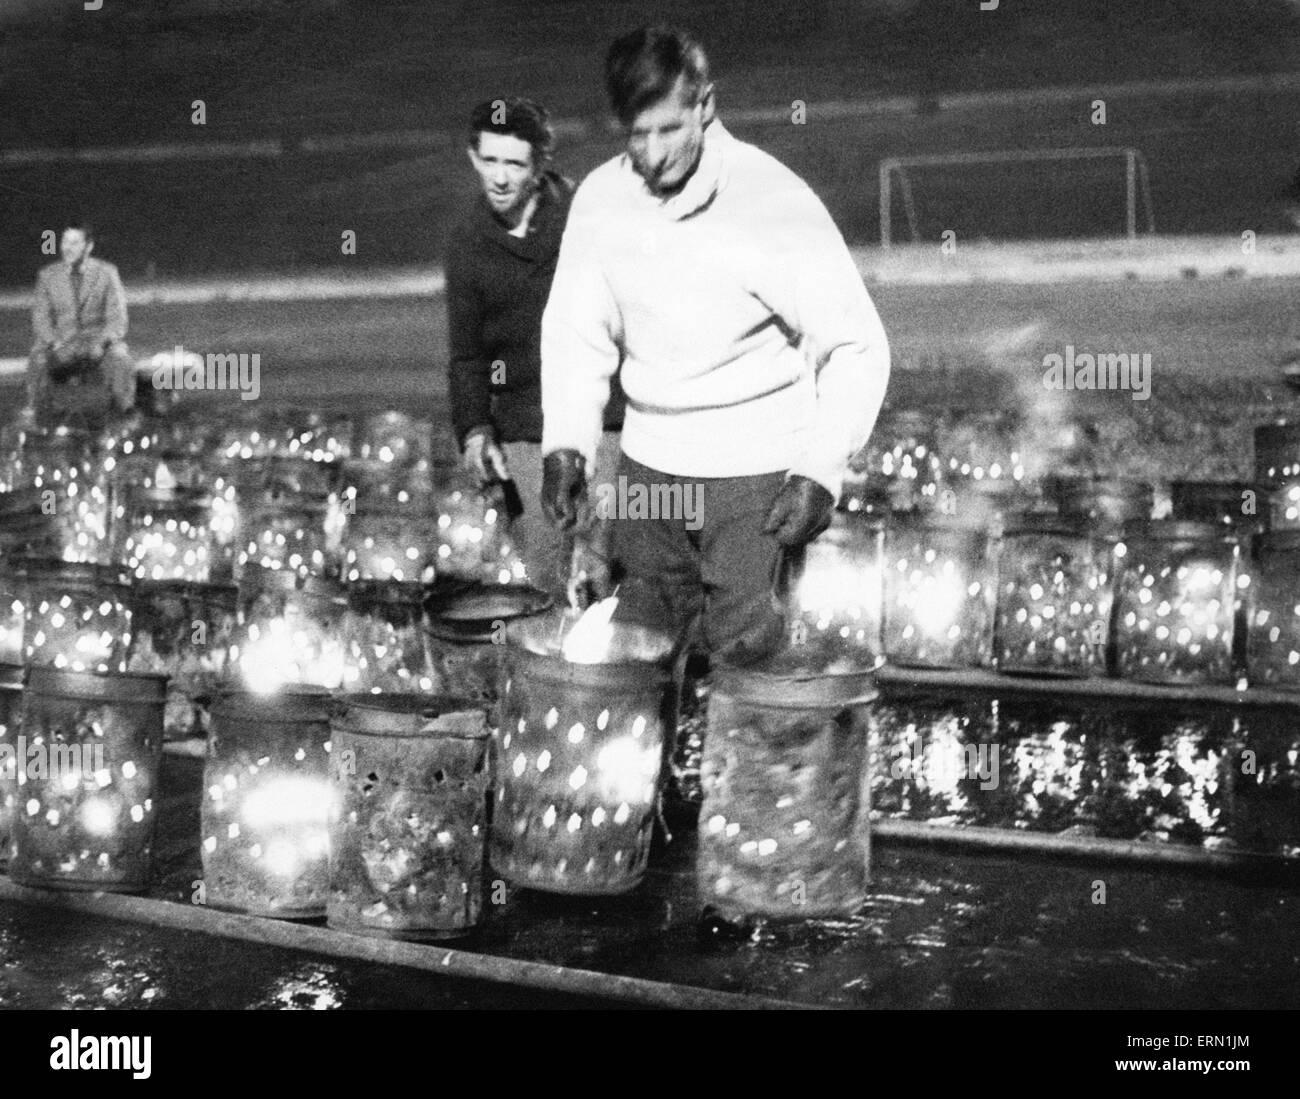 Warming up the frozen pitch at St Andrews, home ground of Birmingham City football club. 21st February 1963. Stock Photo